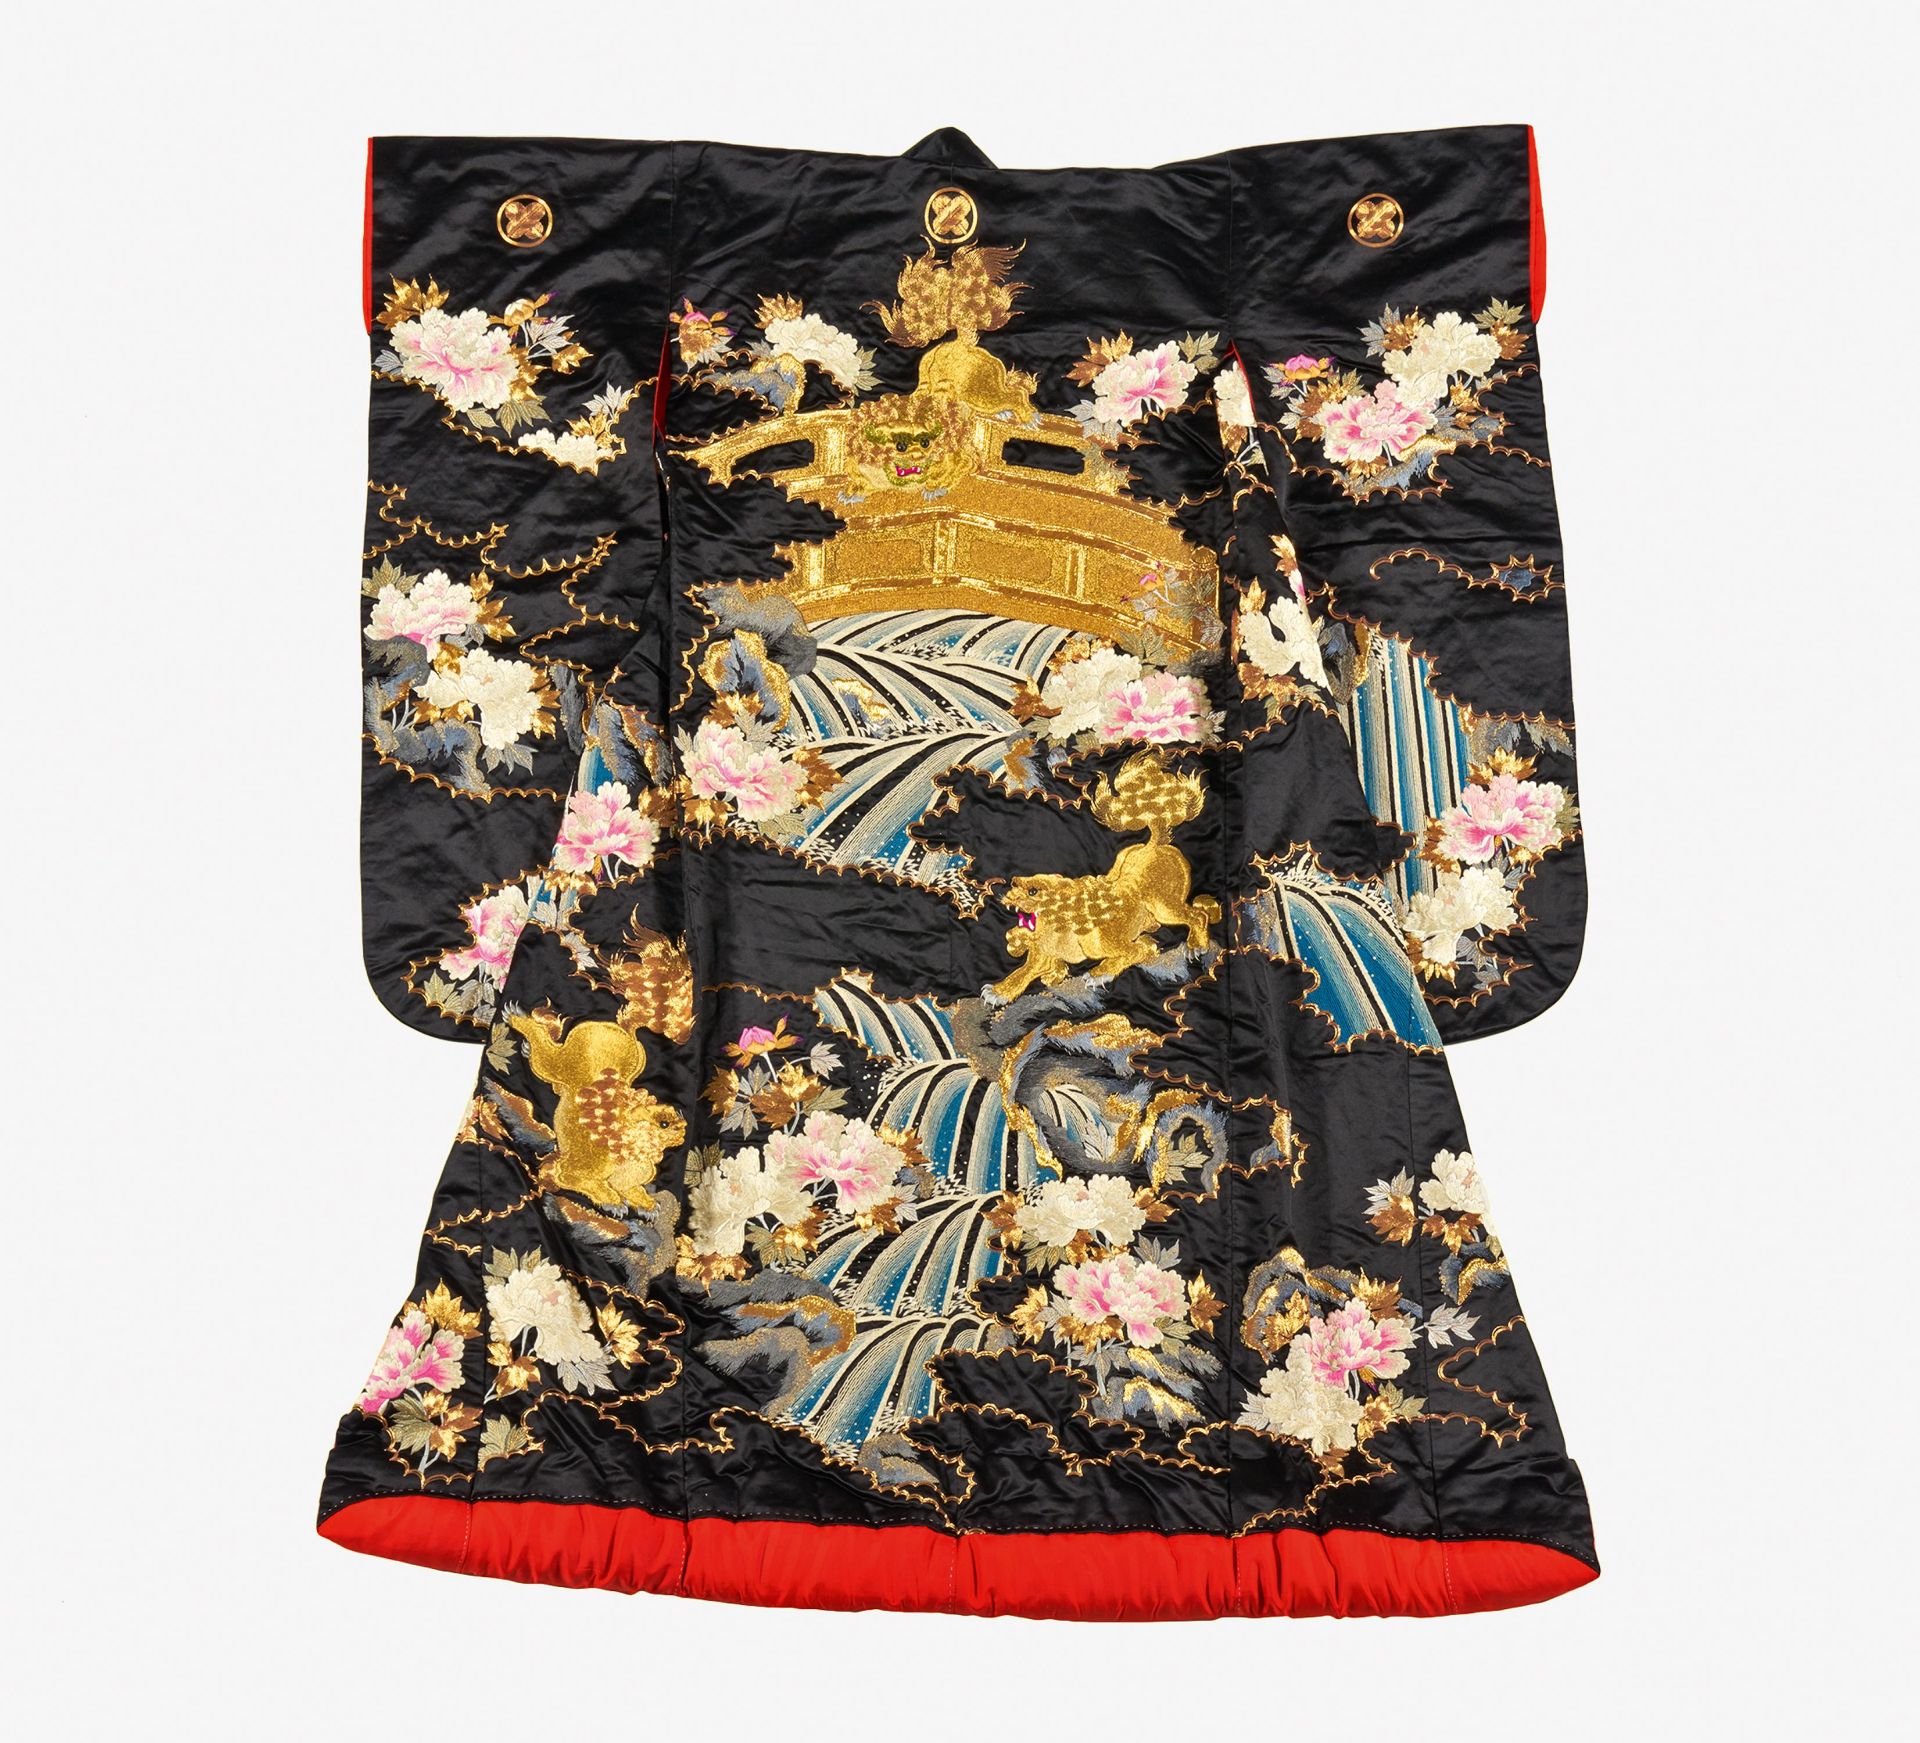 UCHIKAKE. Japan. Early 20th c. Black satin silk, heavily embroidered with colored silk and gold.